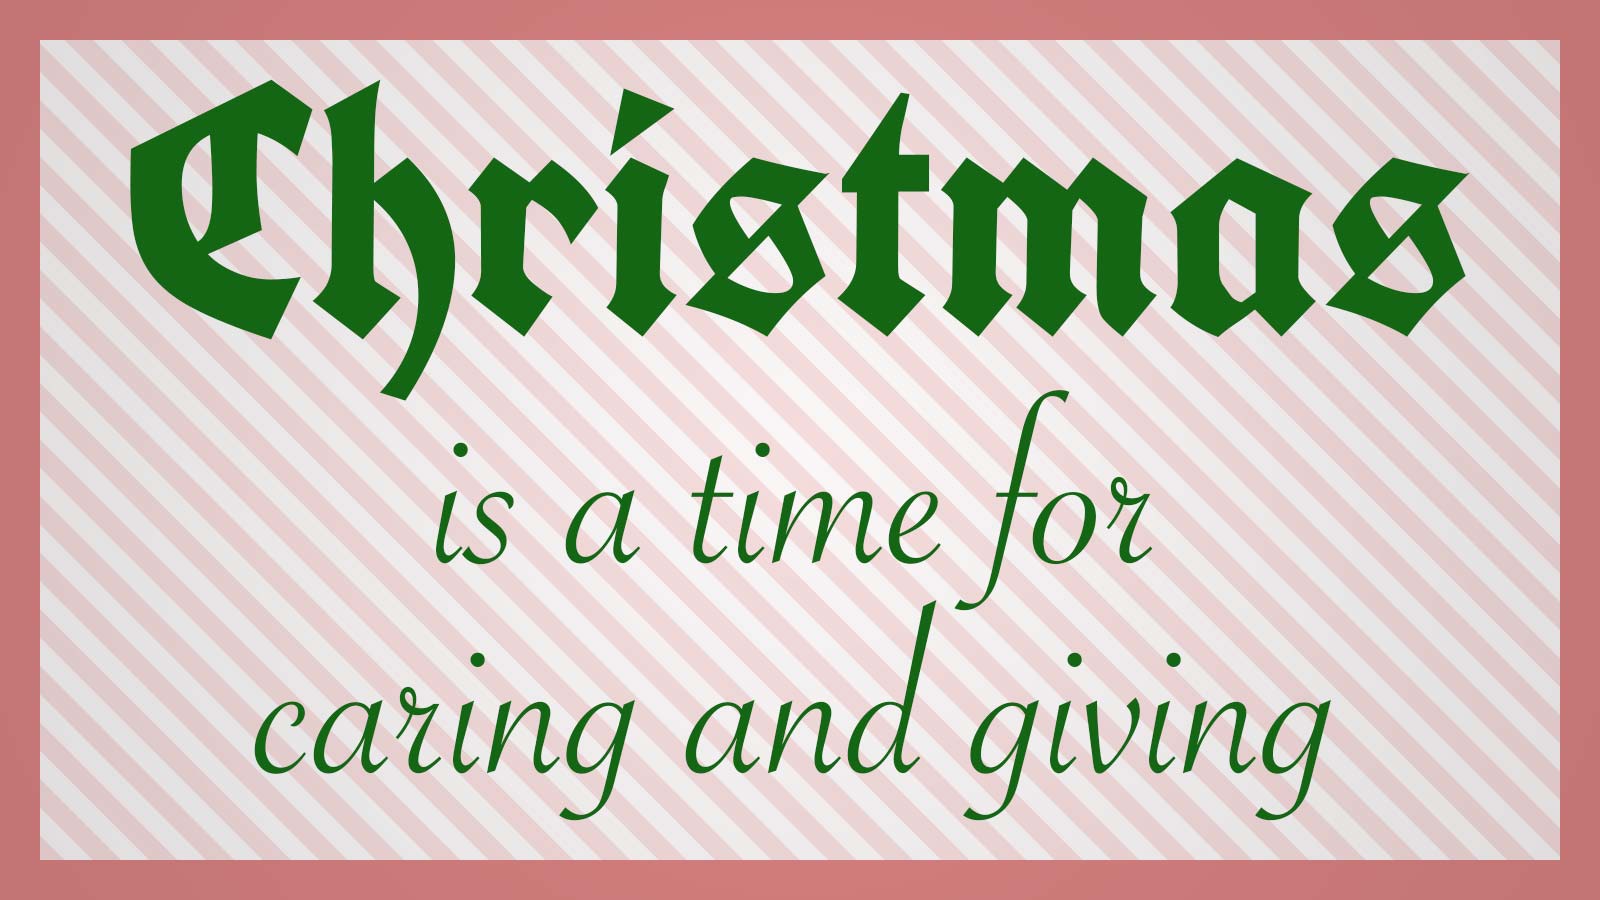 Christmas is a time for caring and giving